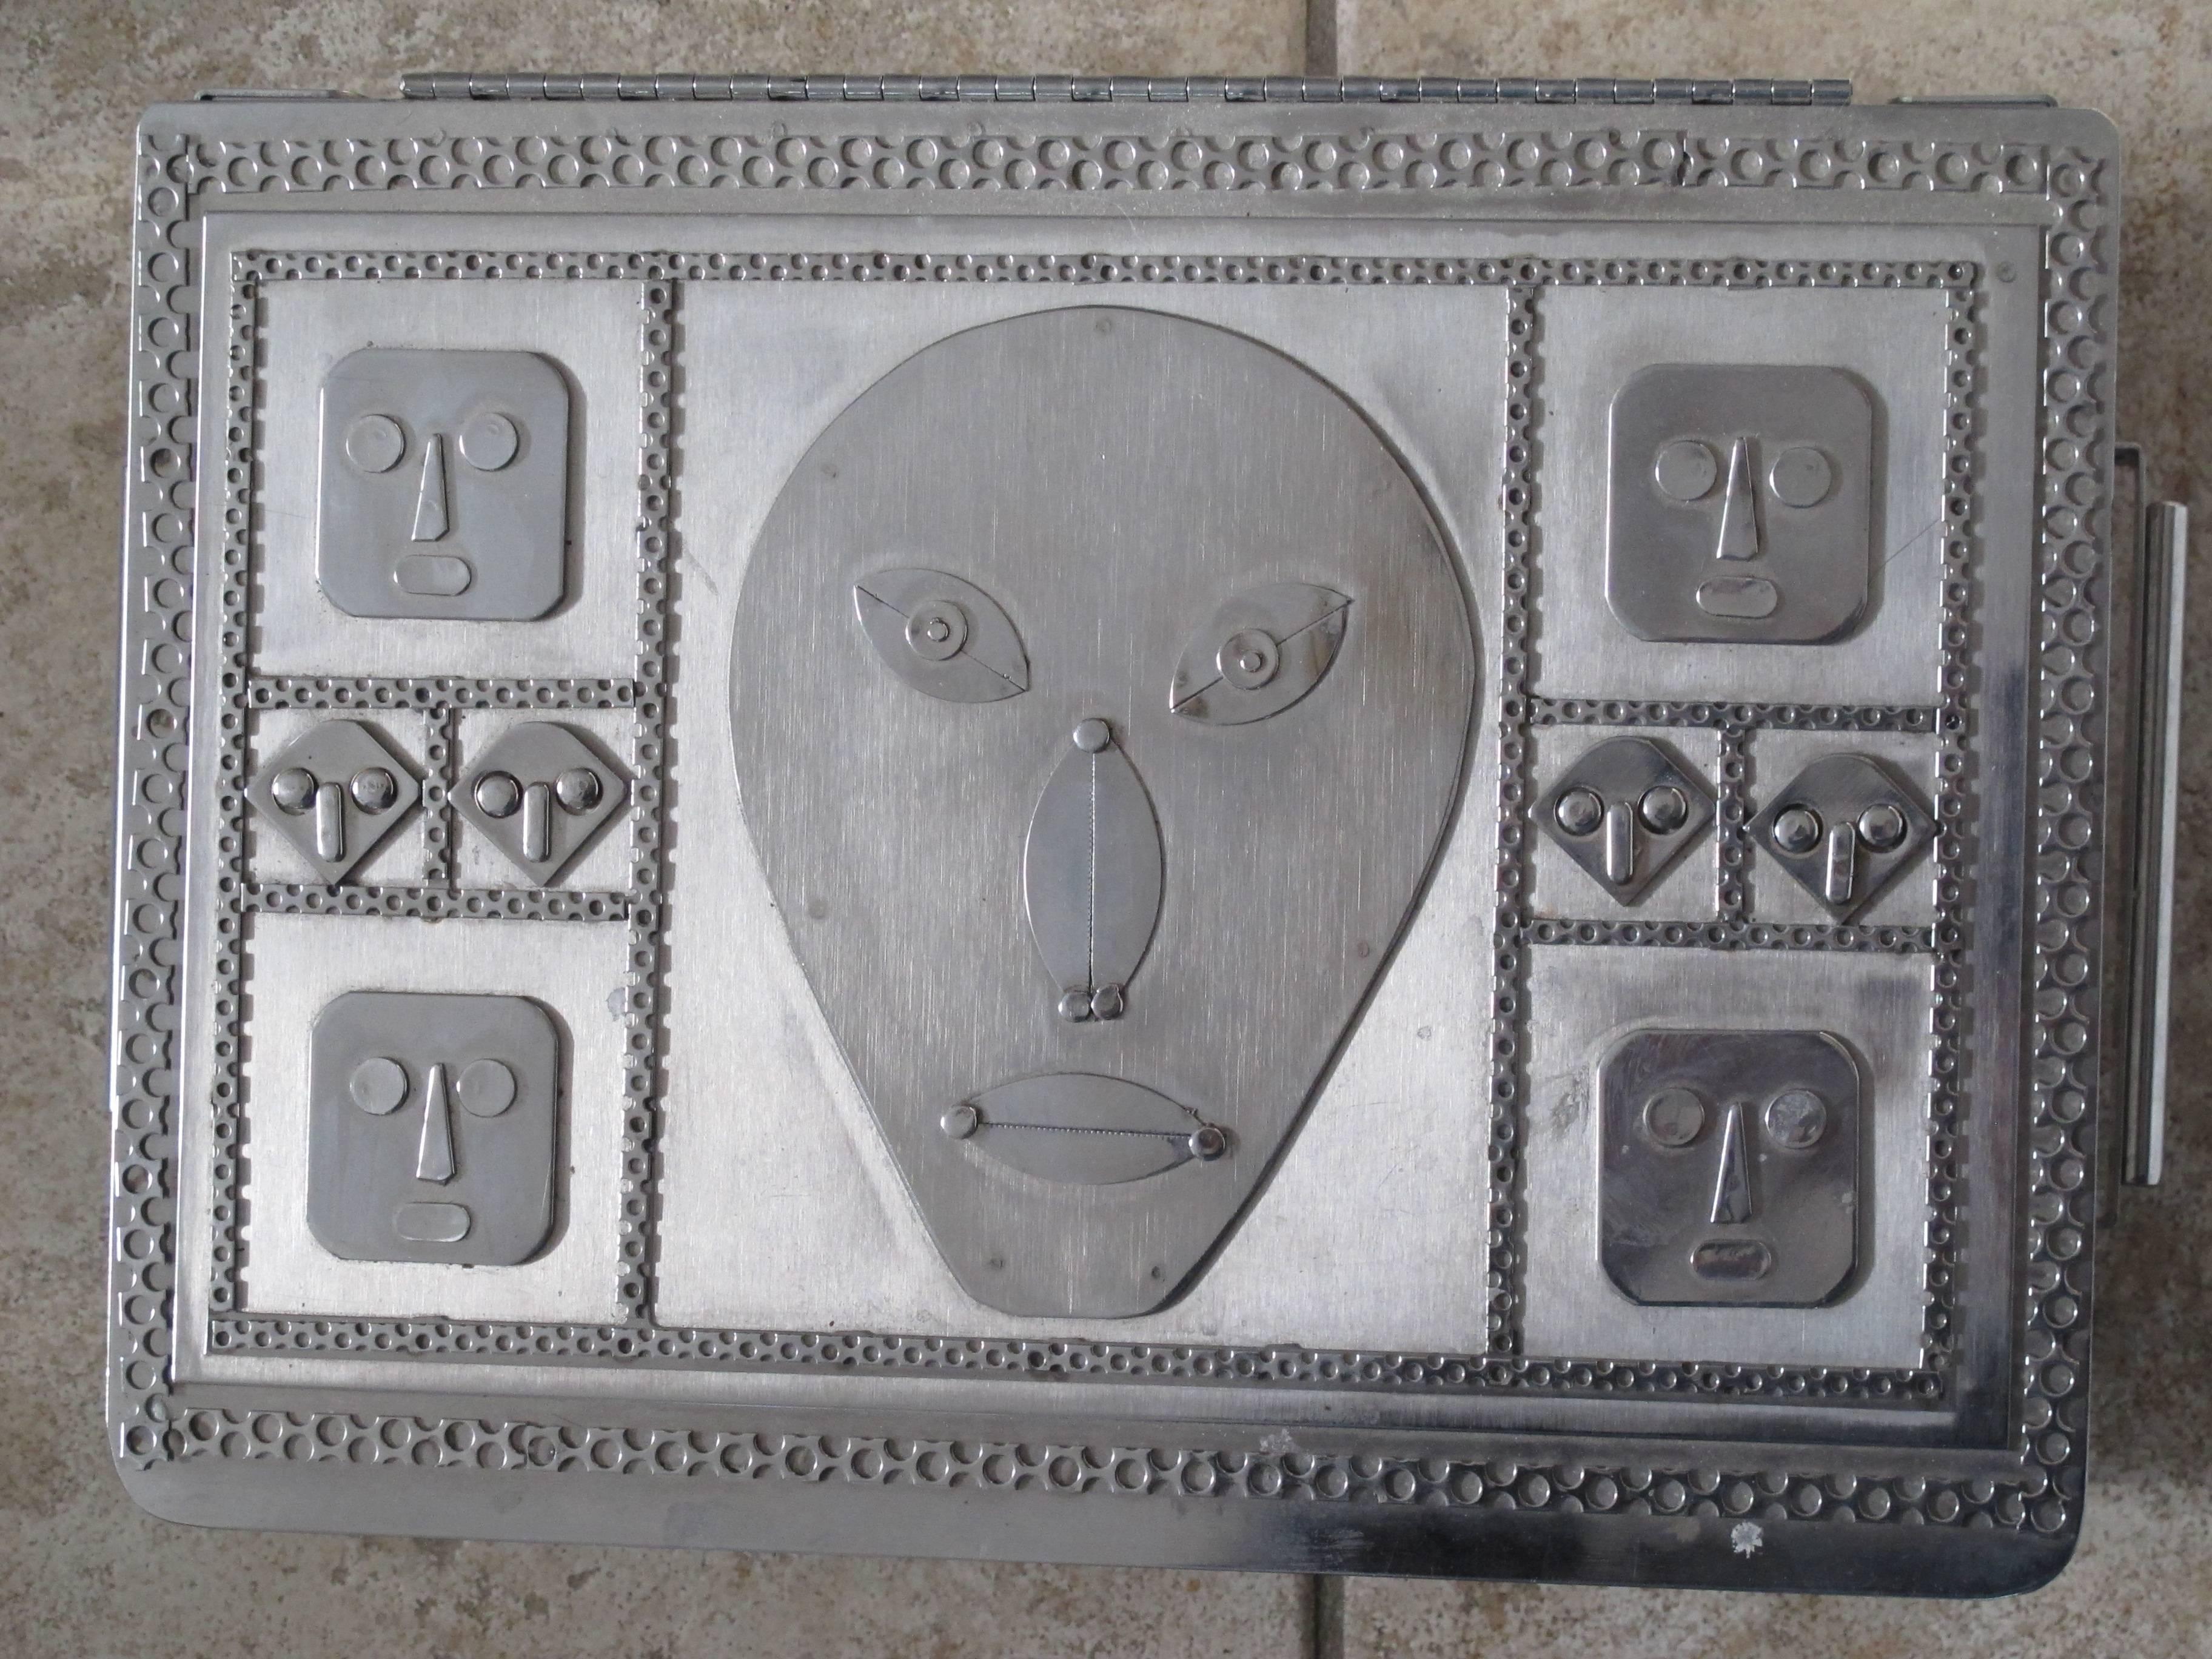 Jewelry box with mask faces of stainless steel by Stanley Szwarc.